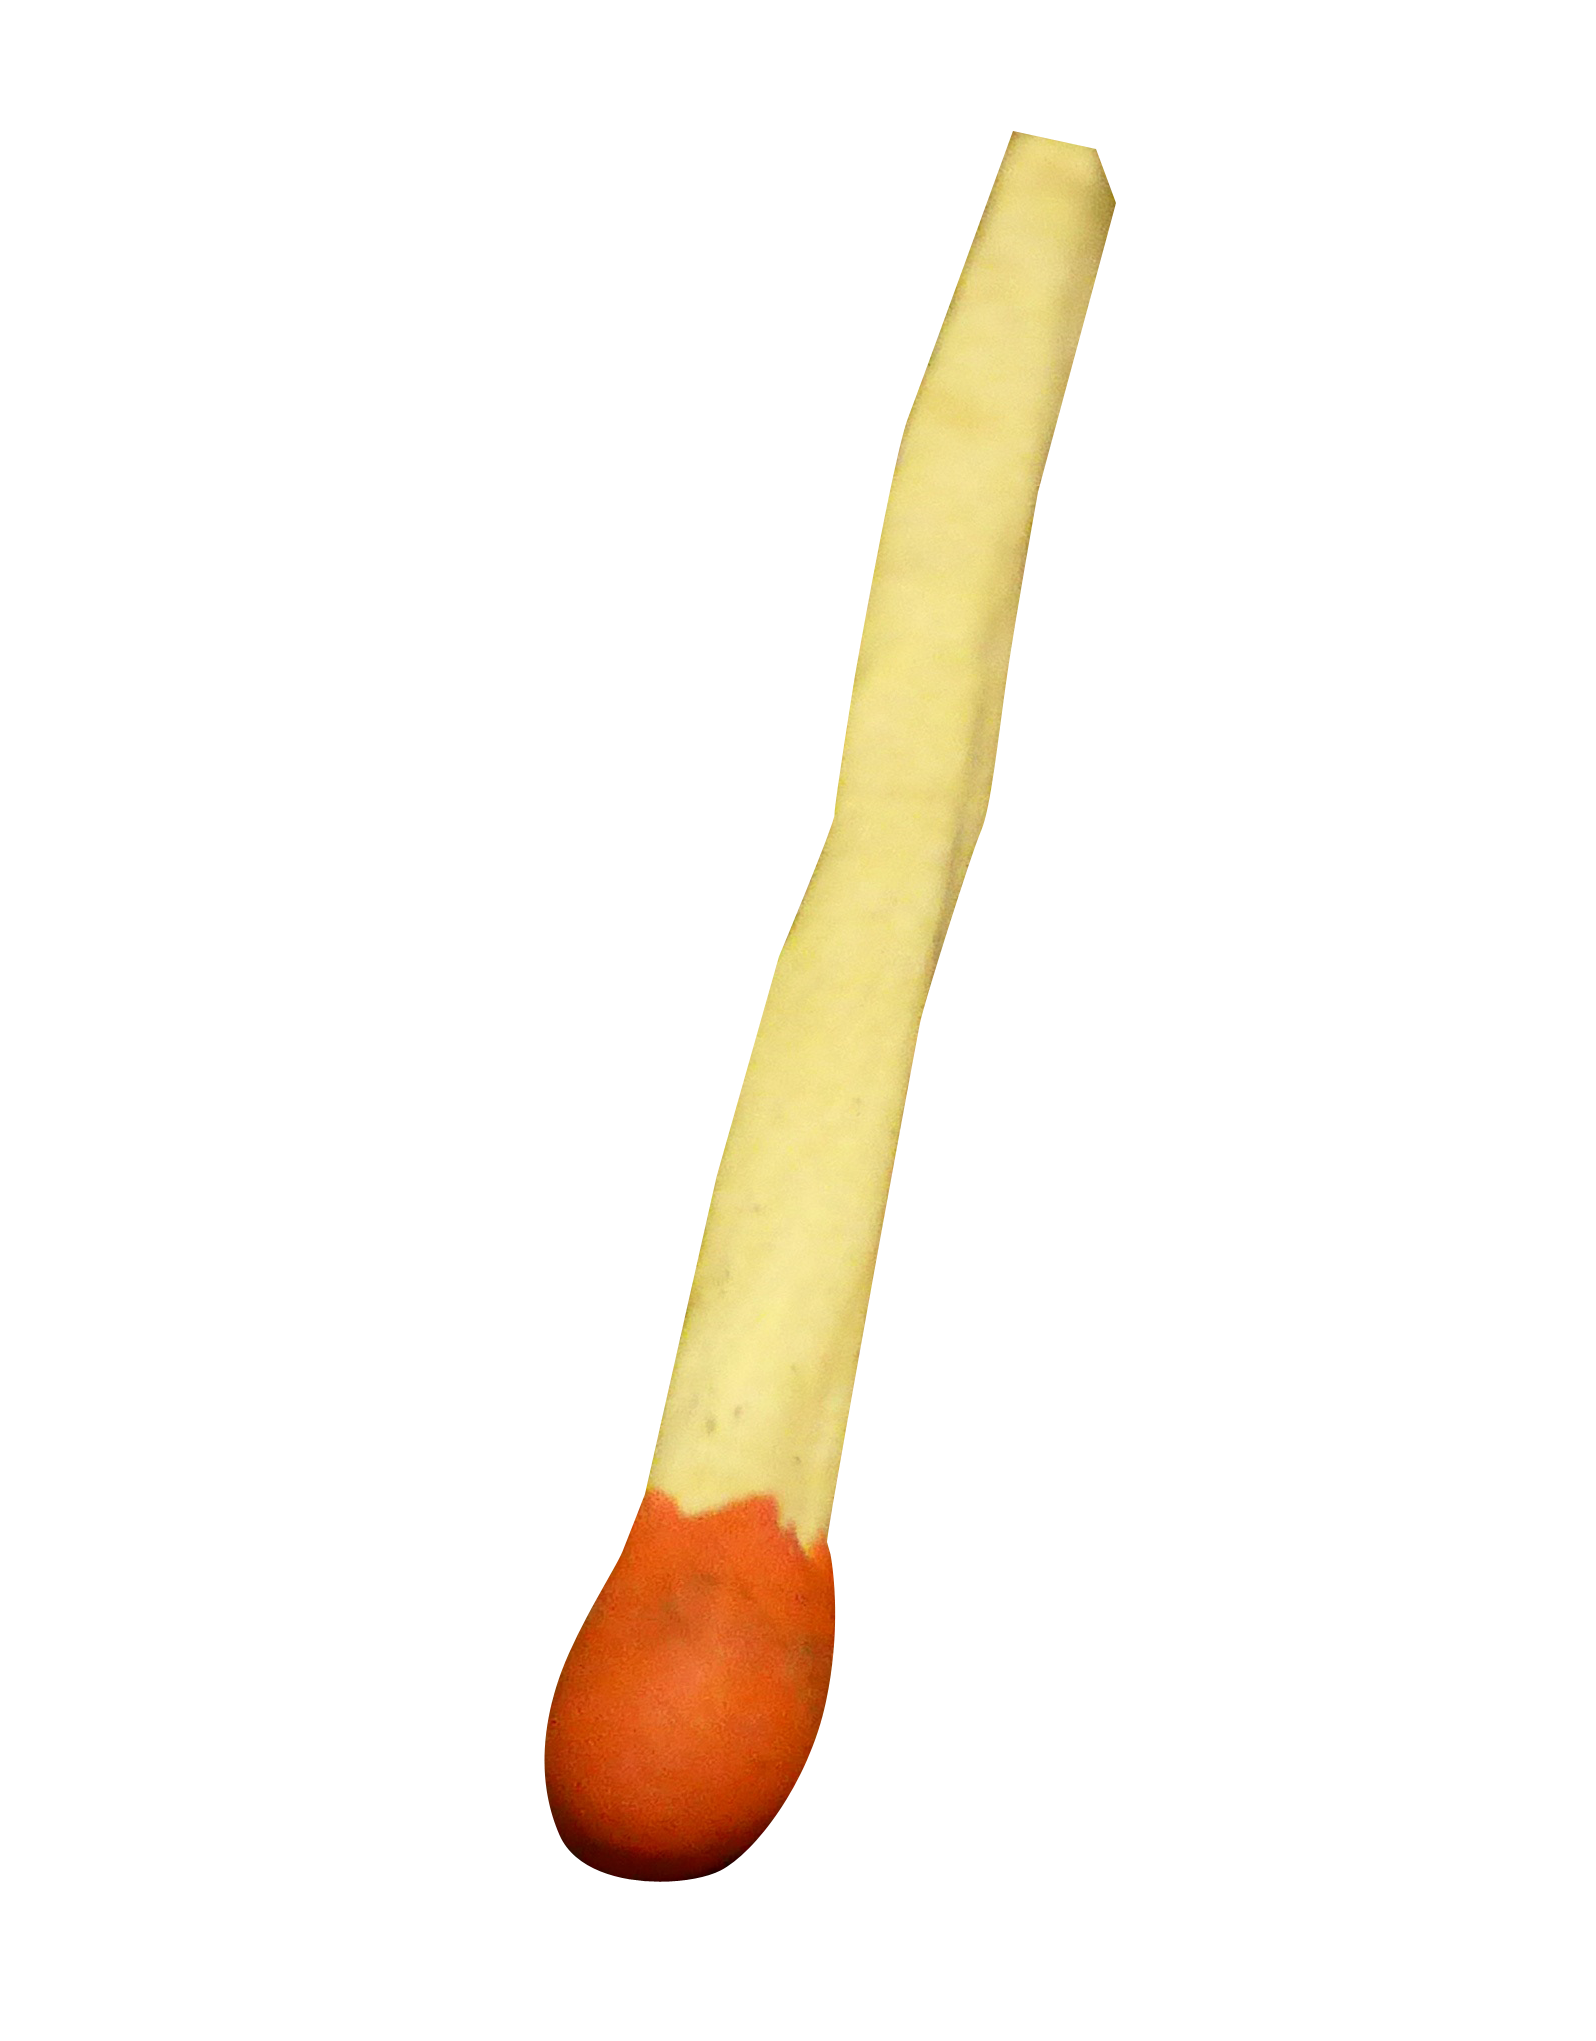 Matchstick PNG Image - PurePNG | Free transparent CC0 PNG Image Library